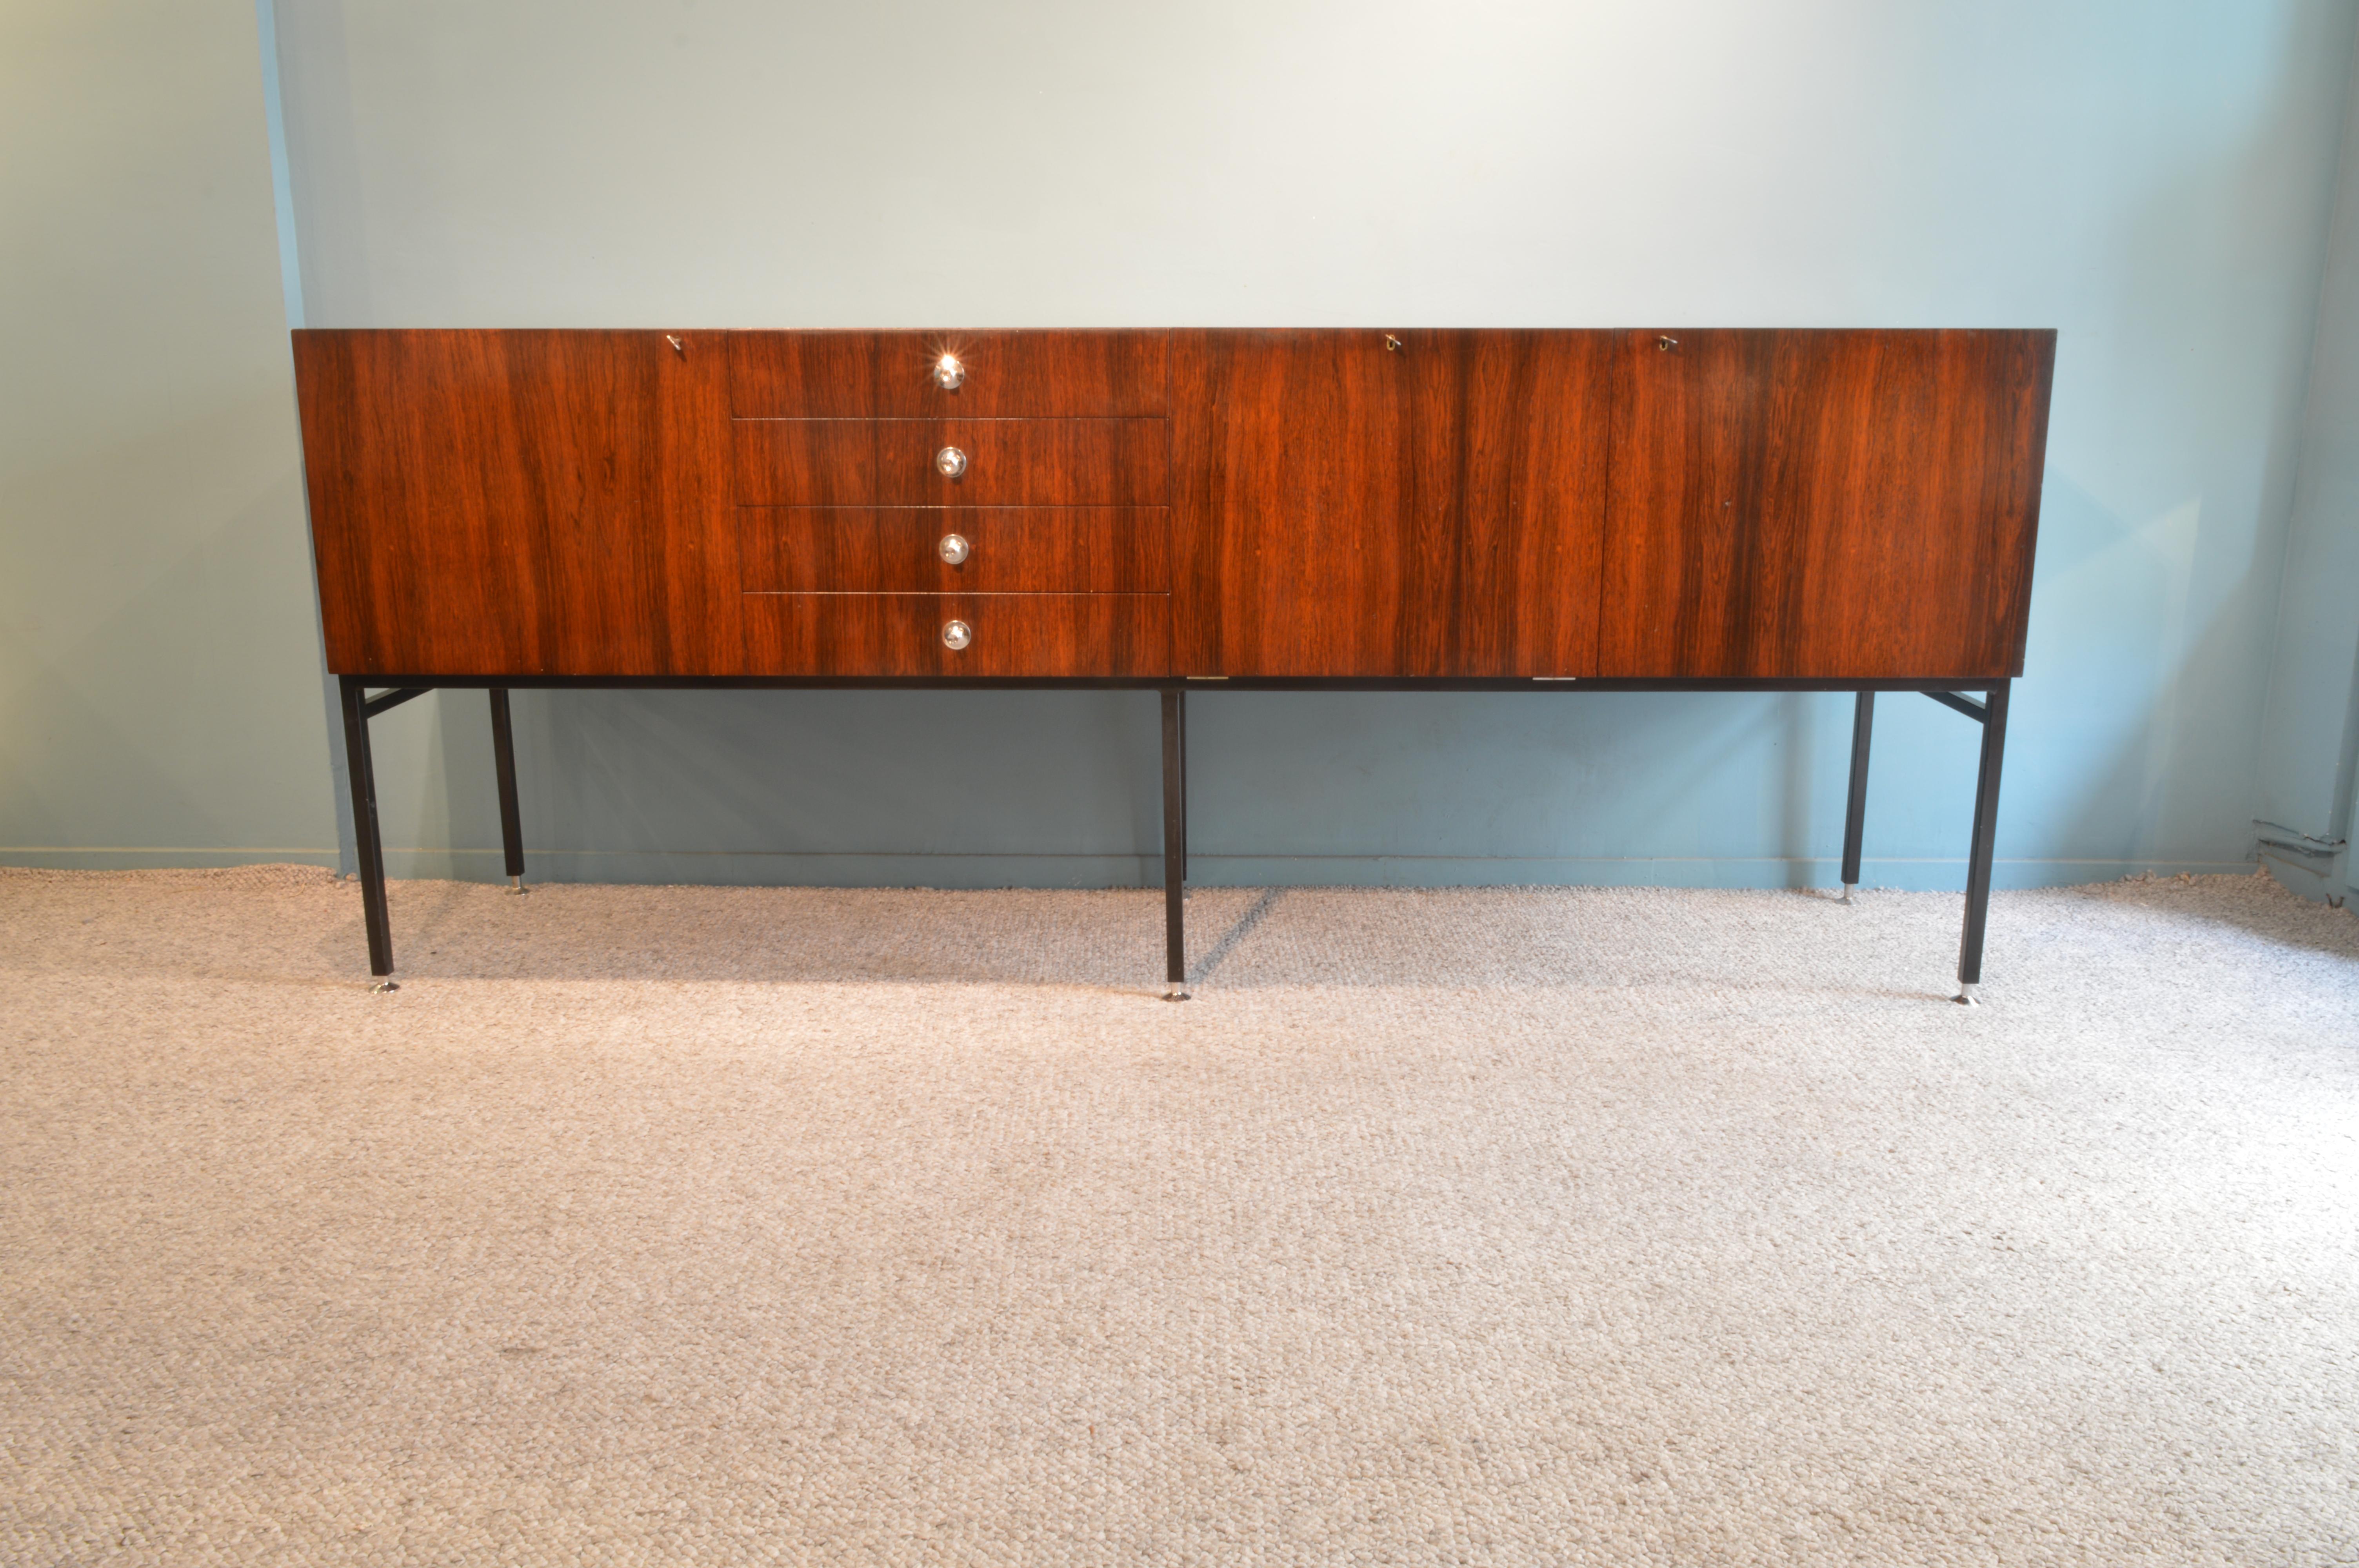 Impressive rosewood sideboard by Alain Richard.
Inside in oak wood. Adjustable feet.
French work circa 1959 manufactured by Meuble TV.
 